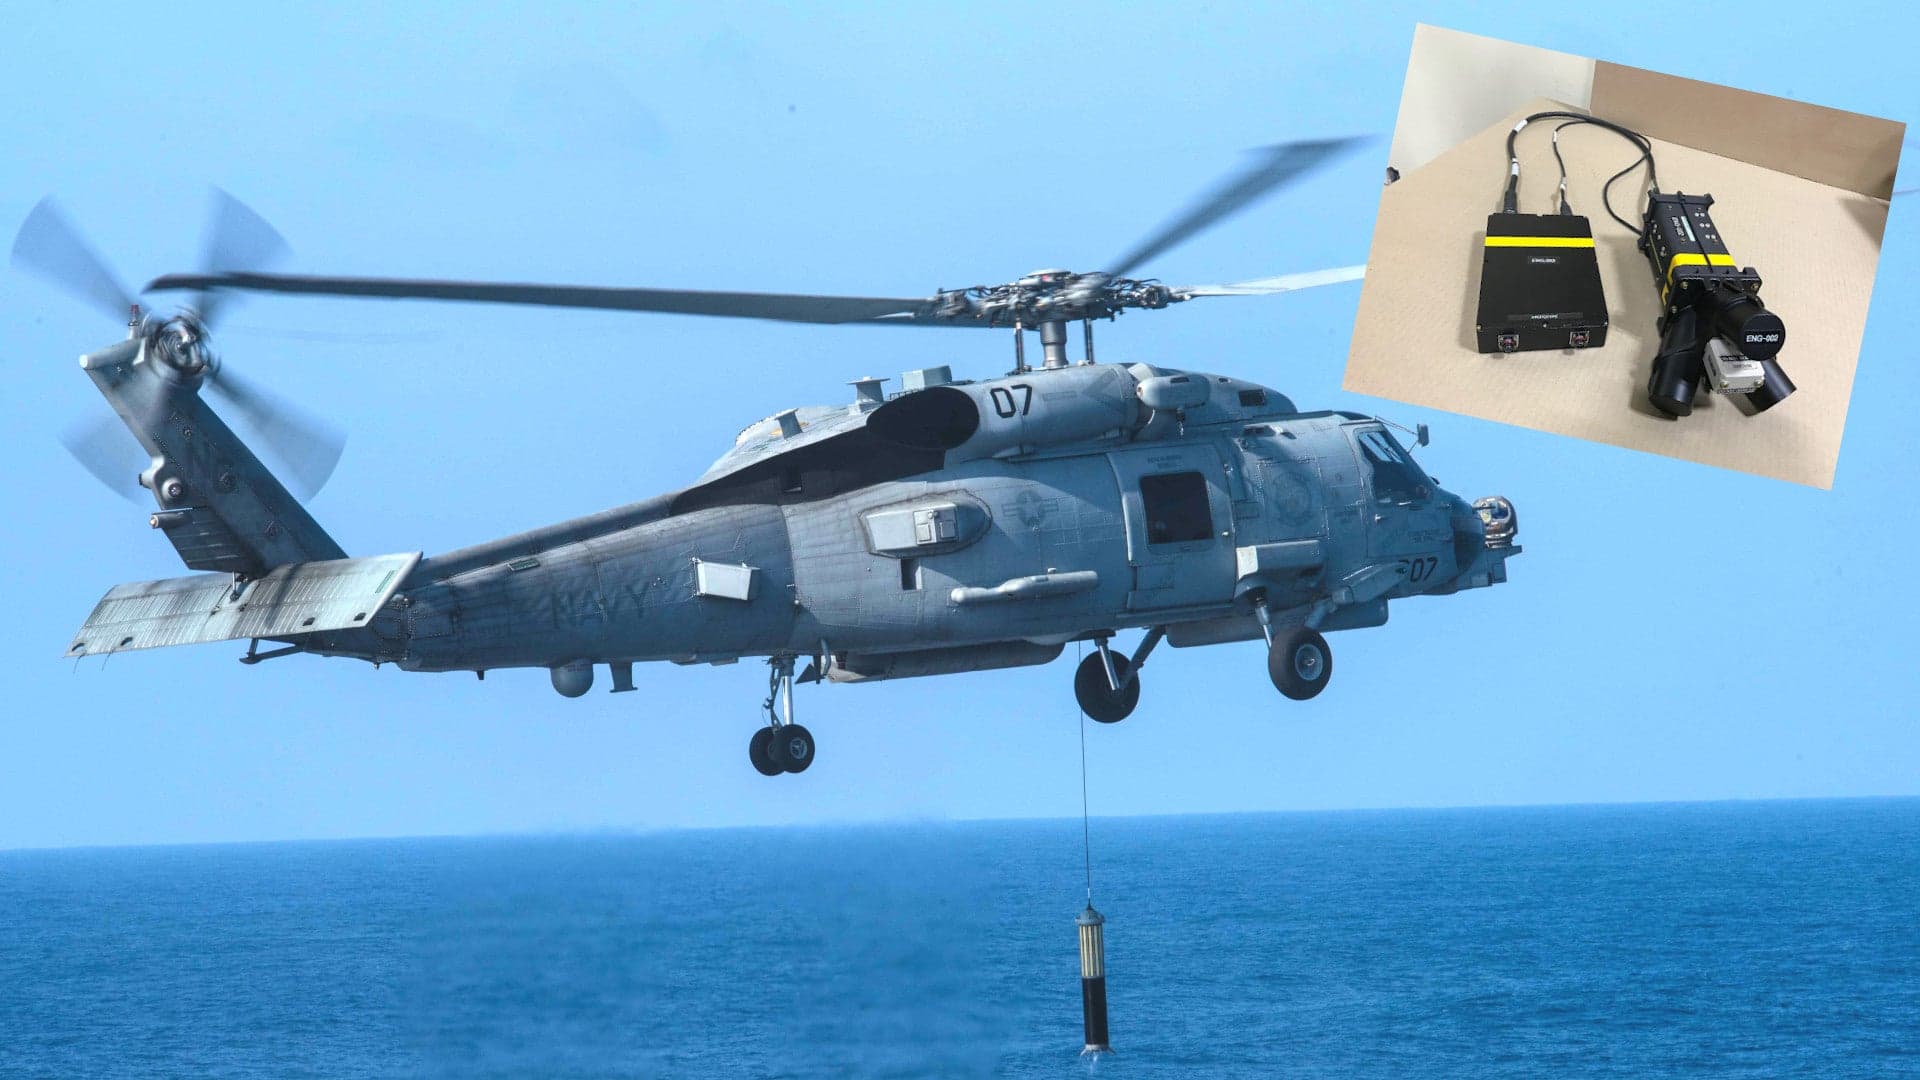 Navy MH-60R Seahawks To Get Magnetic Anomaly Detectors To Help Hunt Enemy Submarines